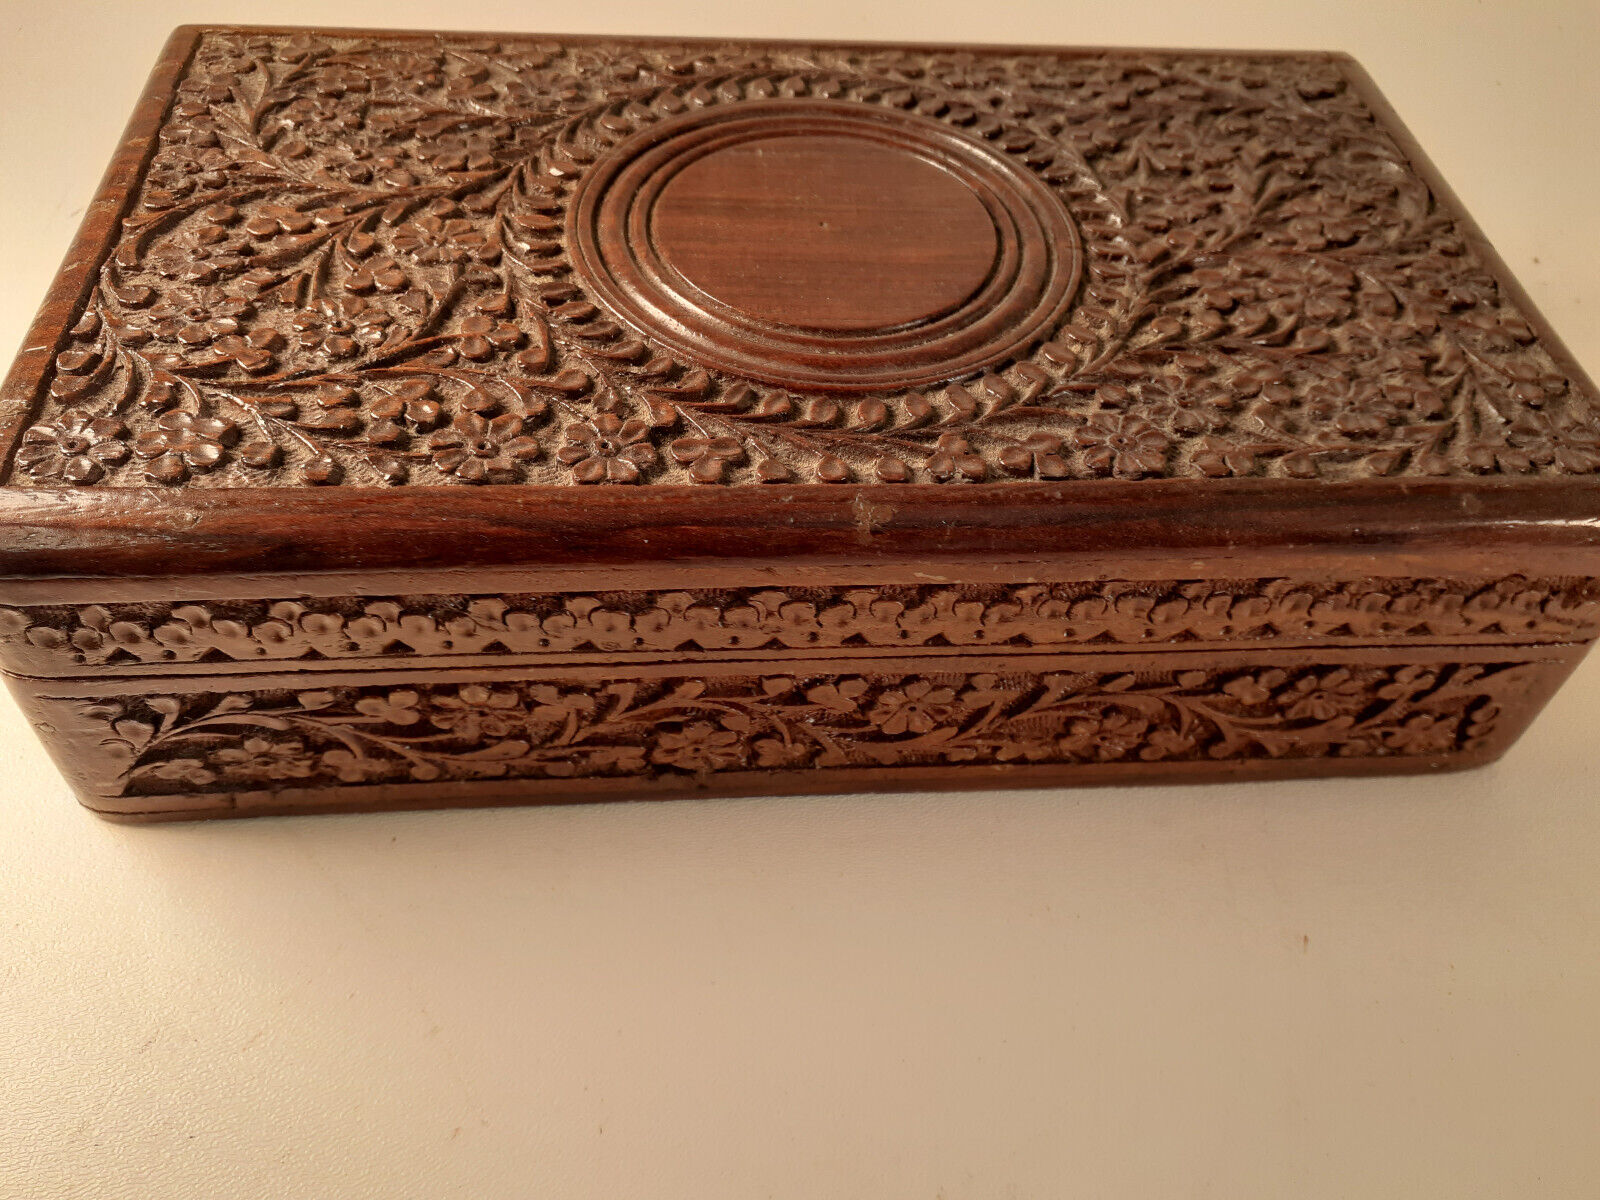 Vintage Highly Carved Jewerly/Trinket Box, Teak, 1970s-80s, Probably From India